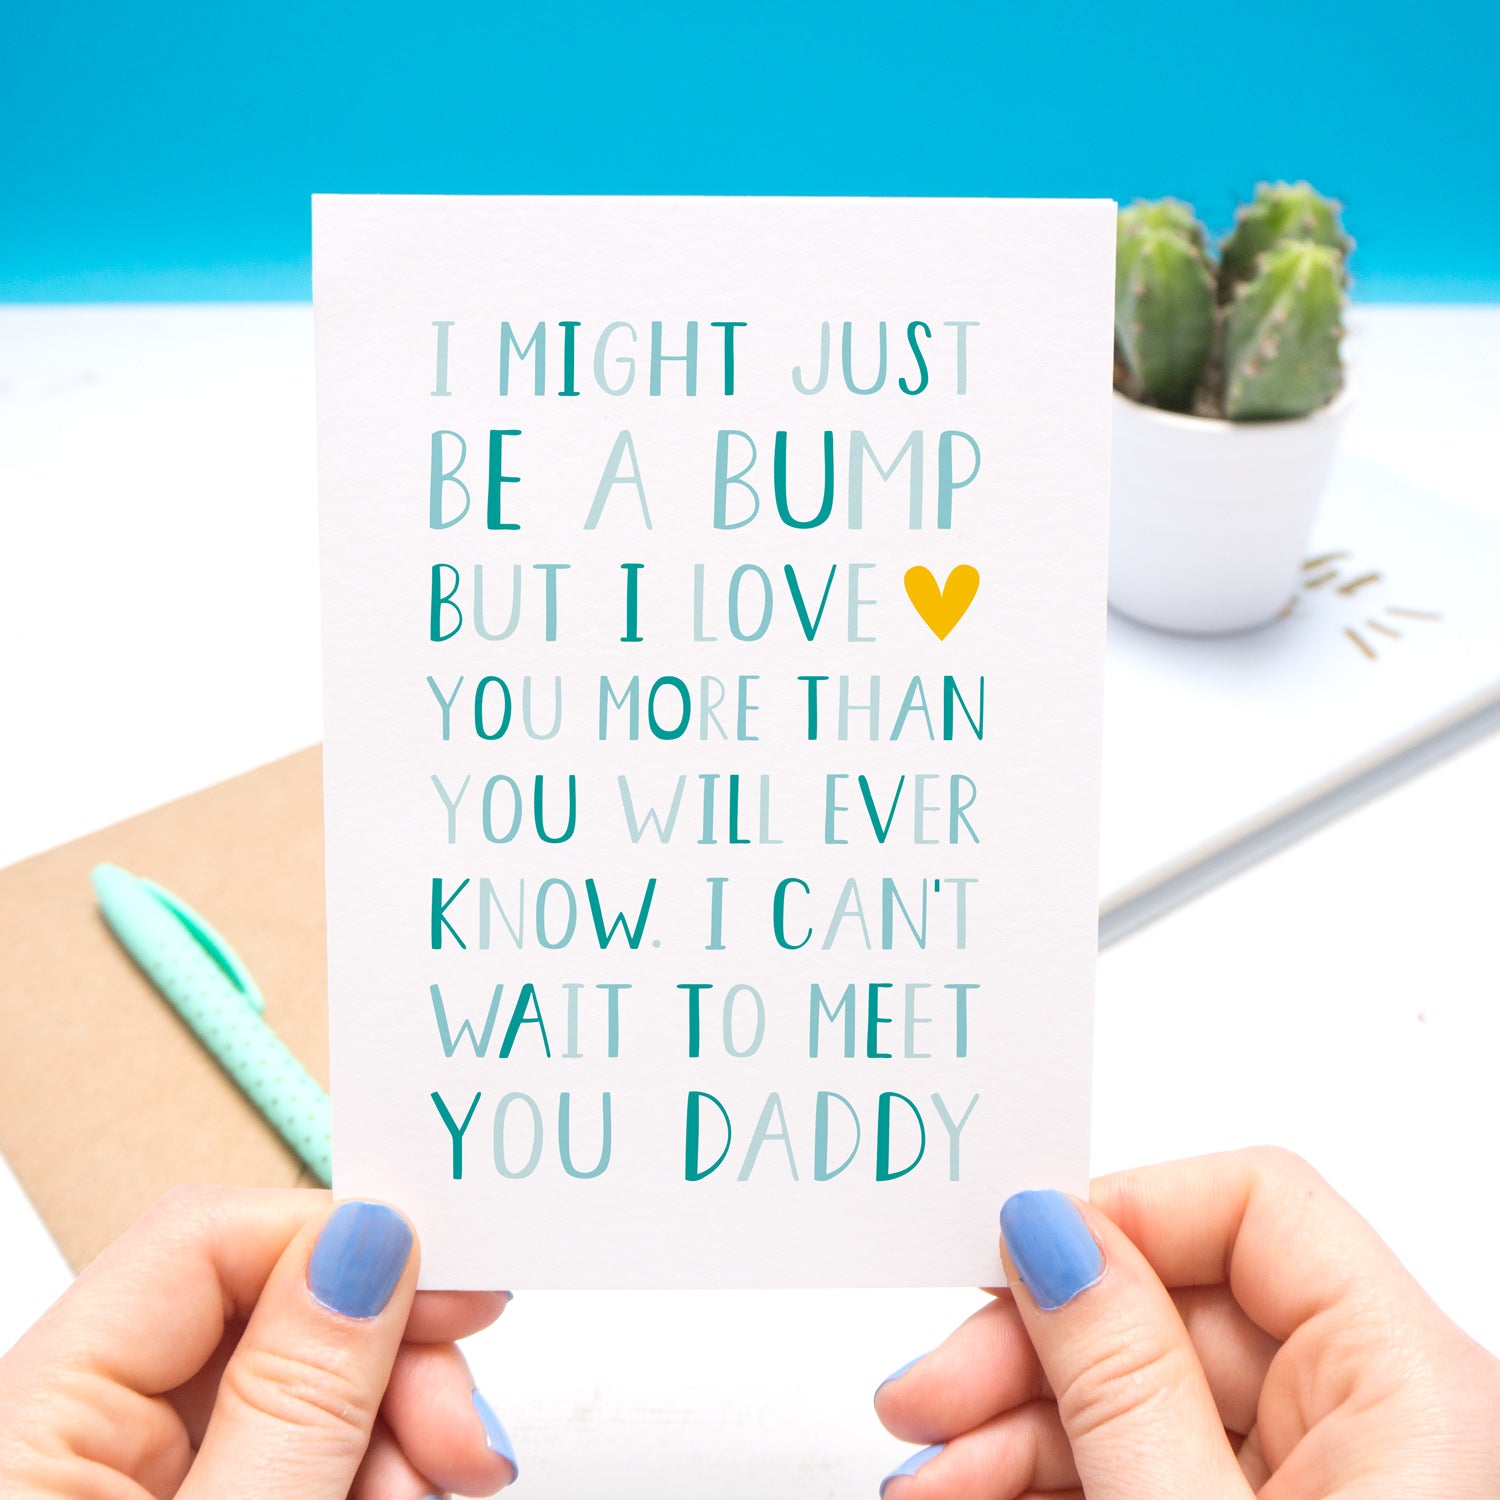 I might just be a bump but I love you more than you will ever know. I can't wait to meet you daddy - Typographic Father's day card in blue 